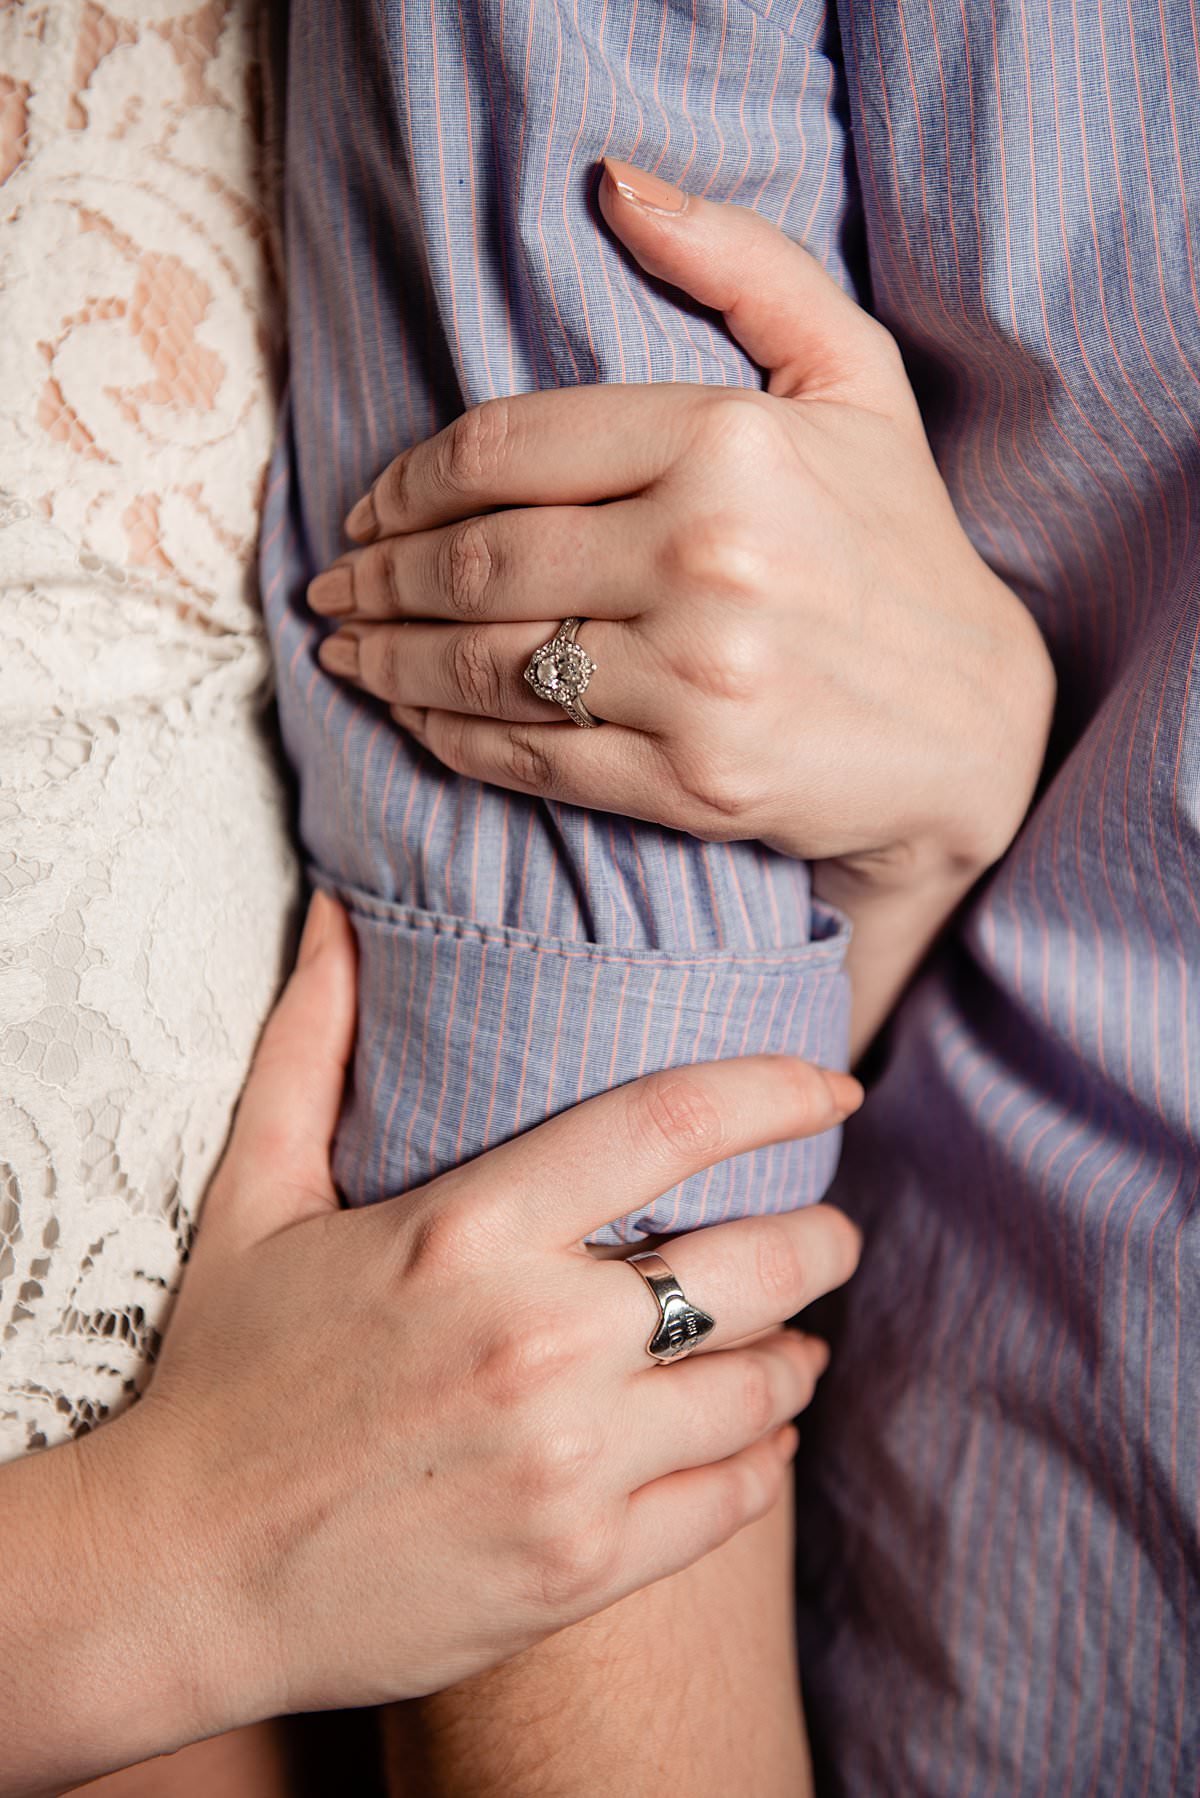 Close up photo of girls hand with engagement ring  as she embraces her fiances arm